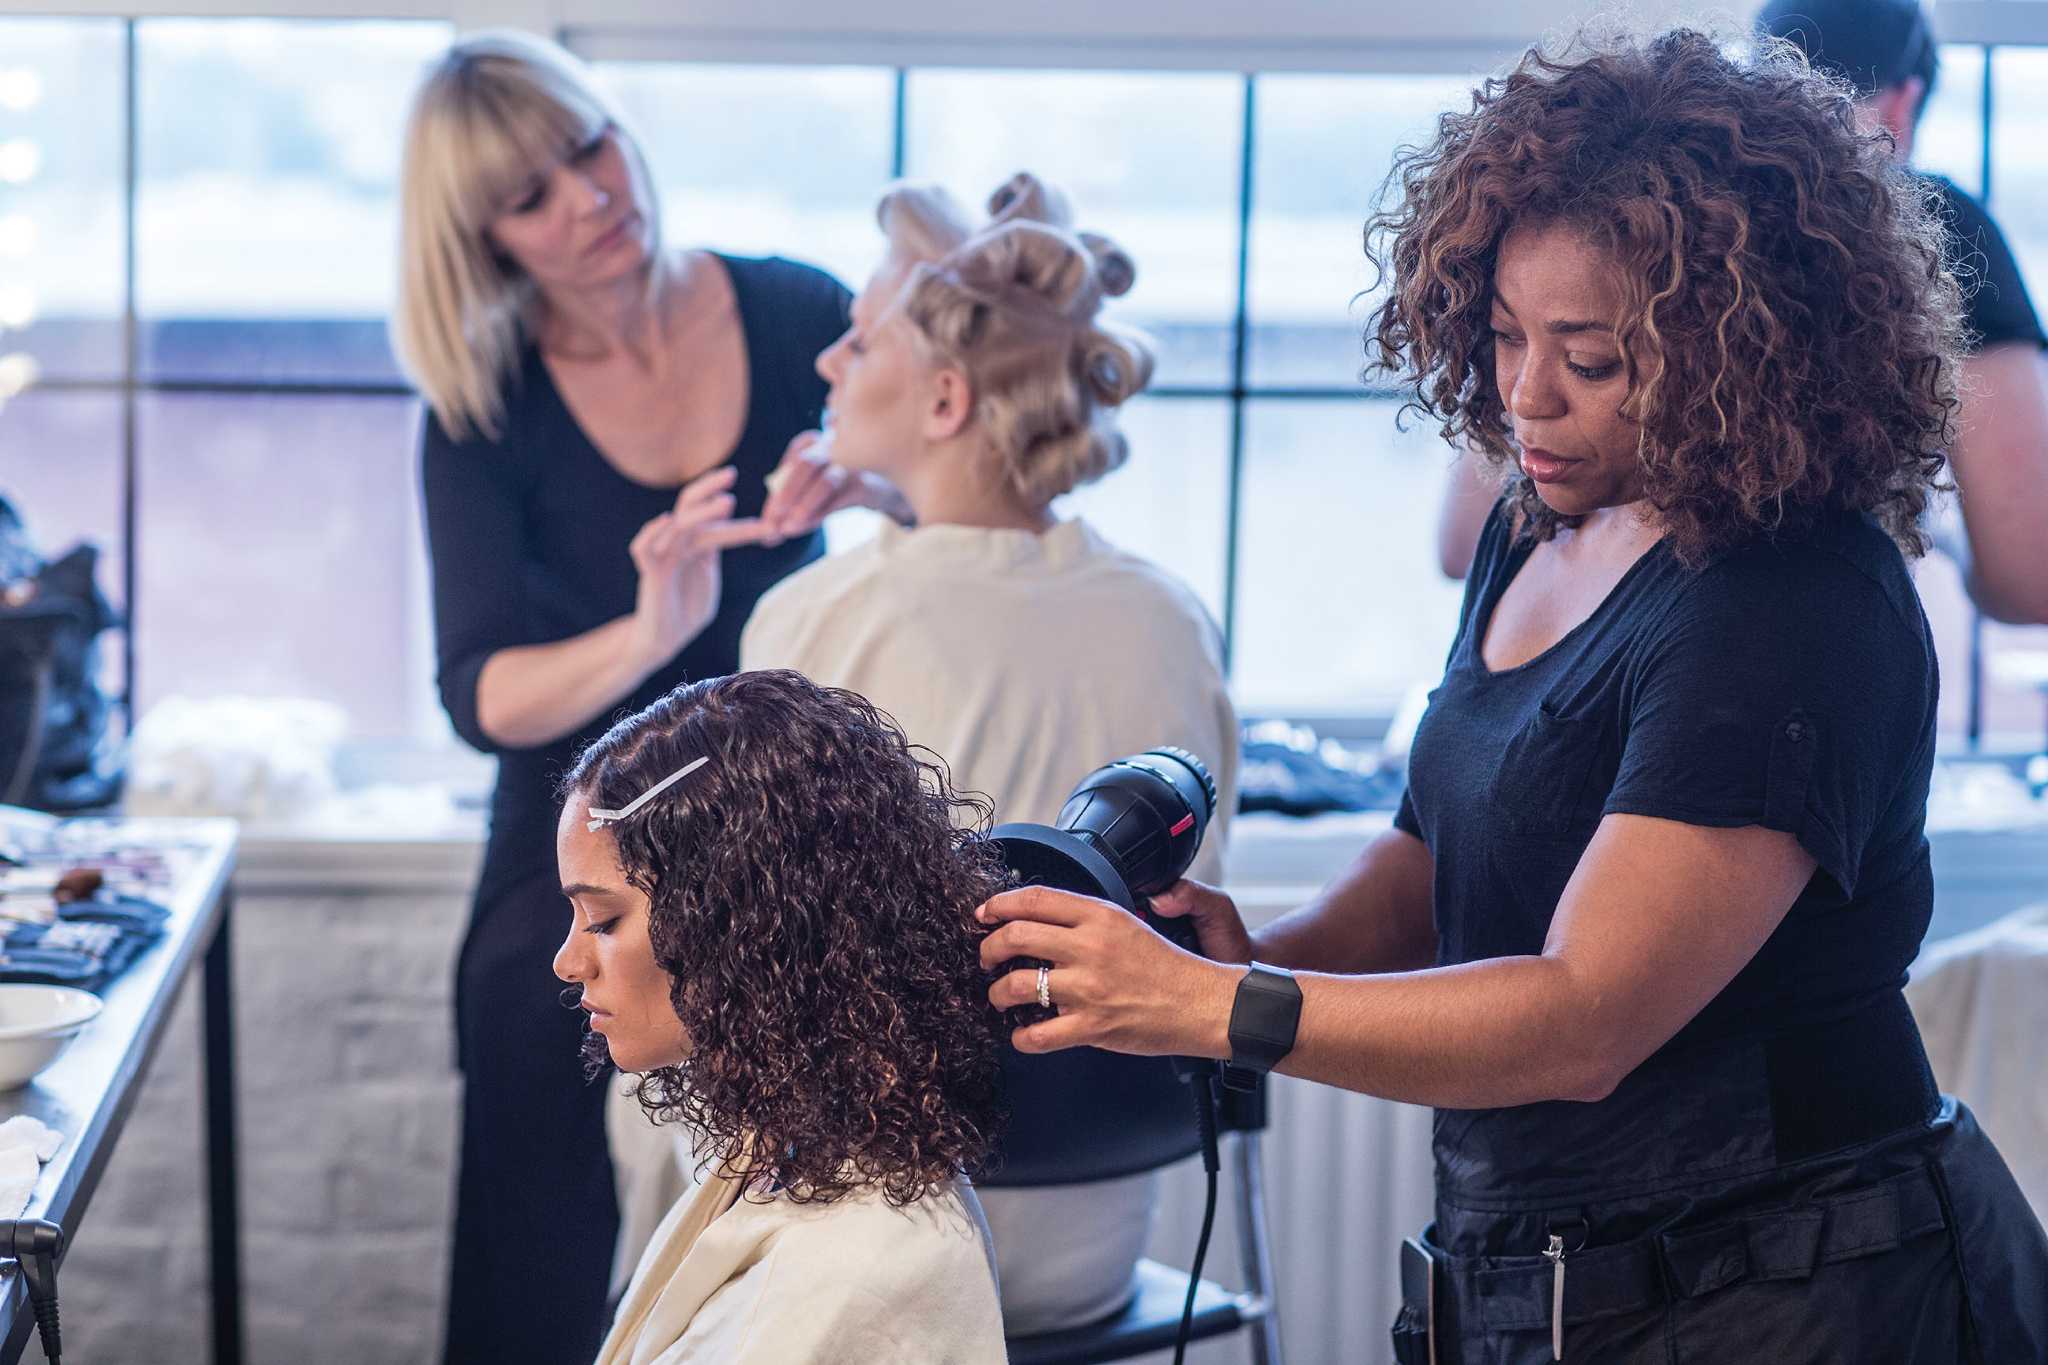 Best Hair Salons in Houston, Texas, according to Yelp